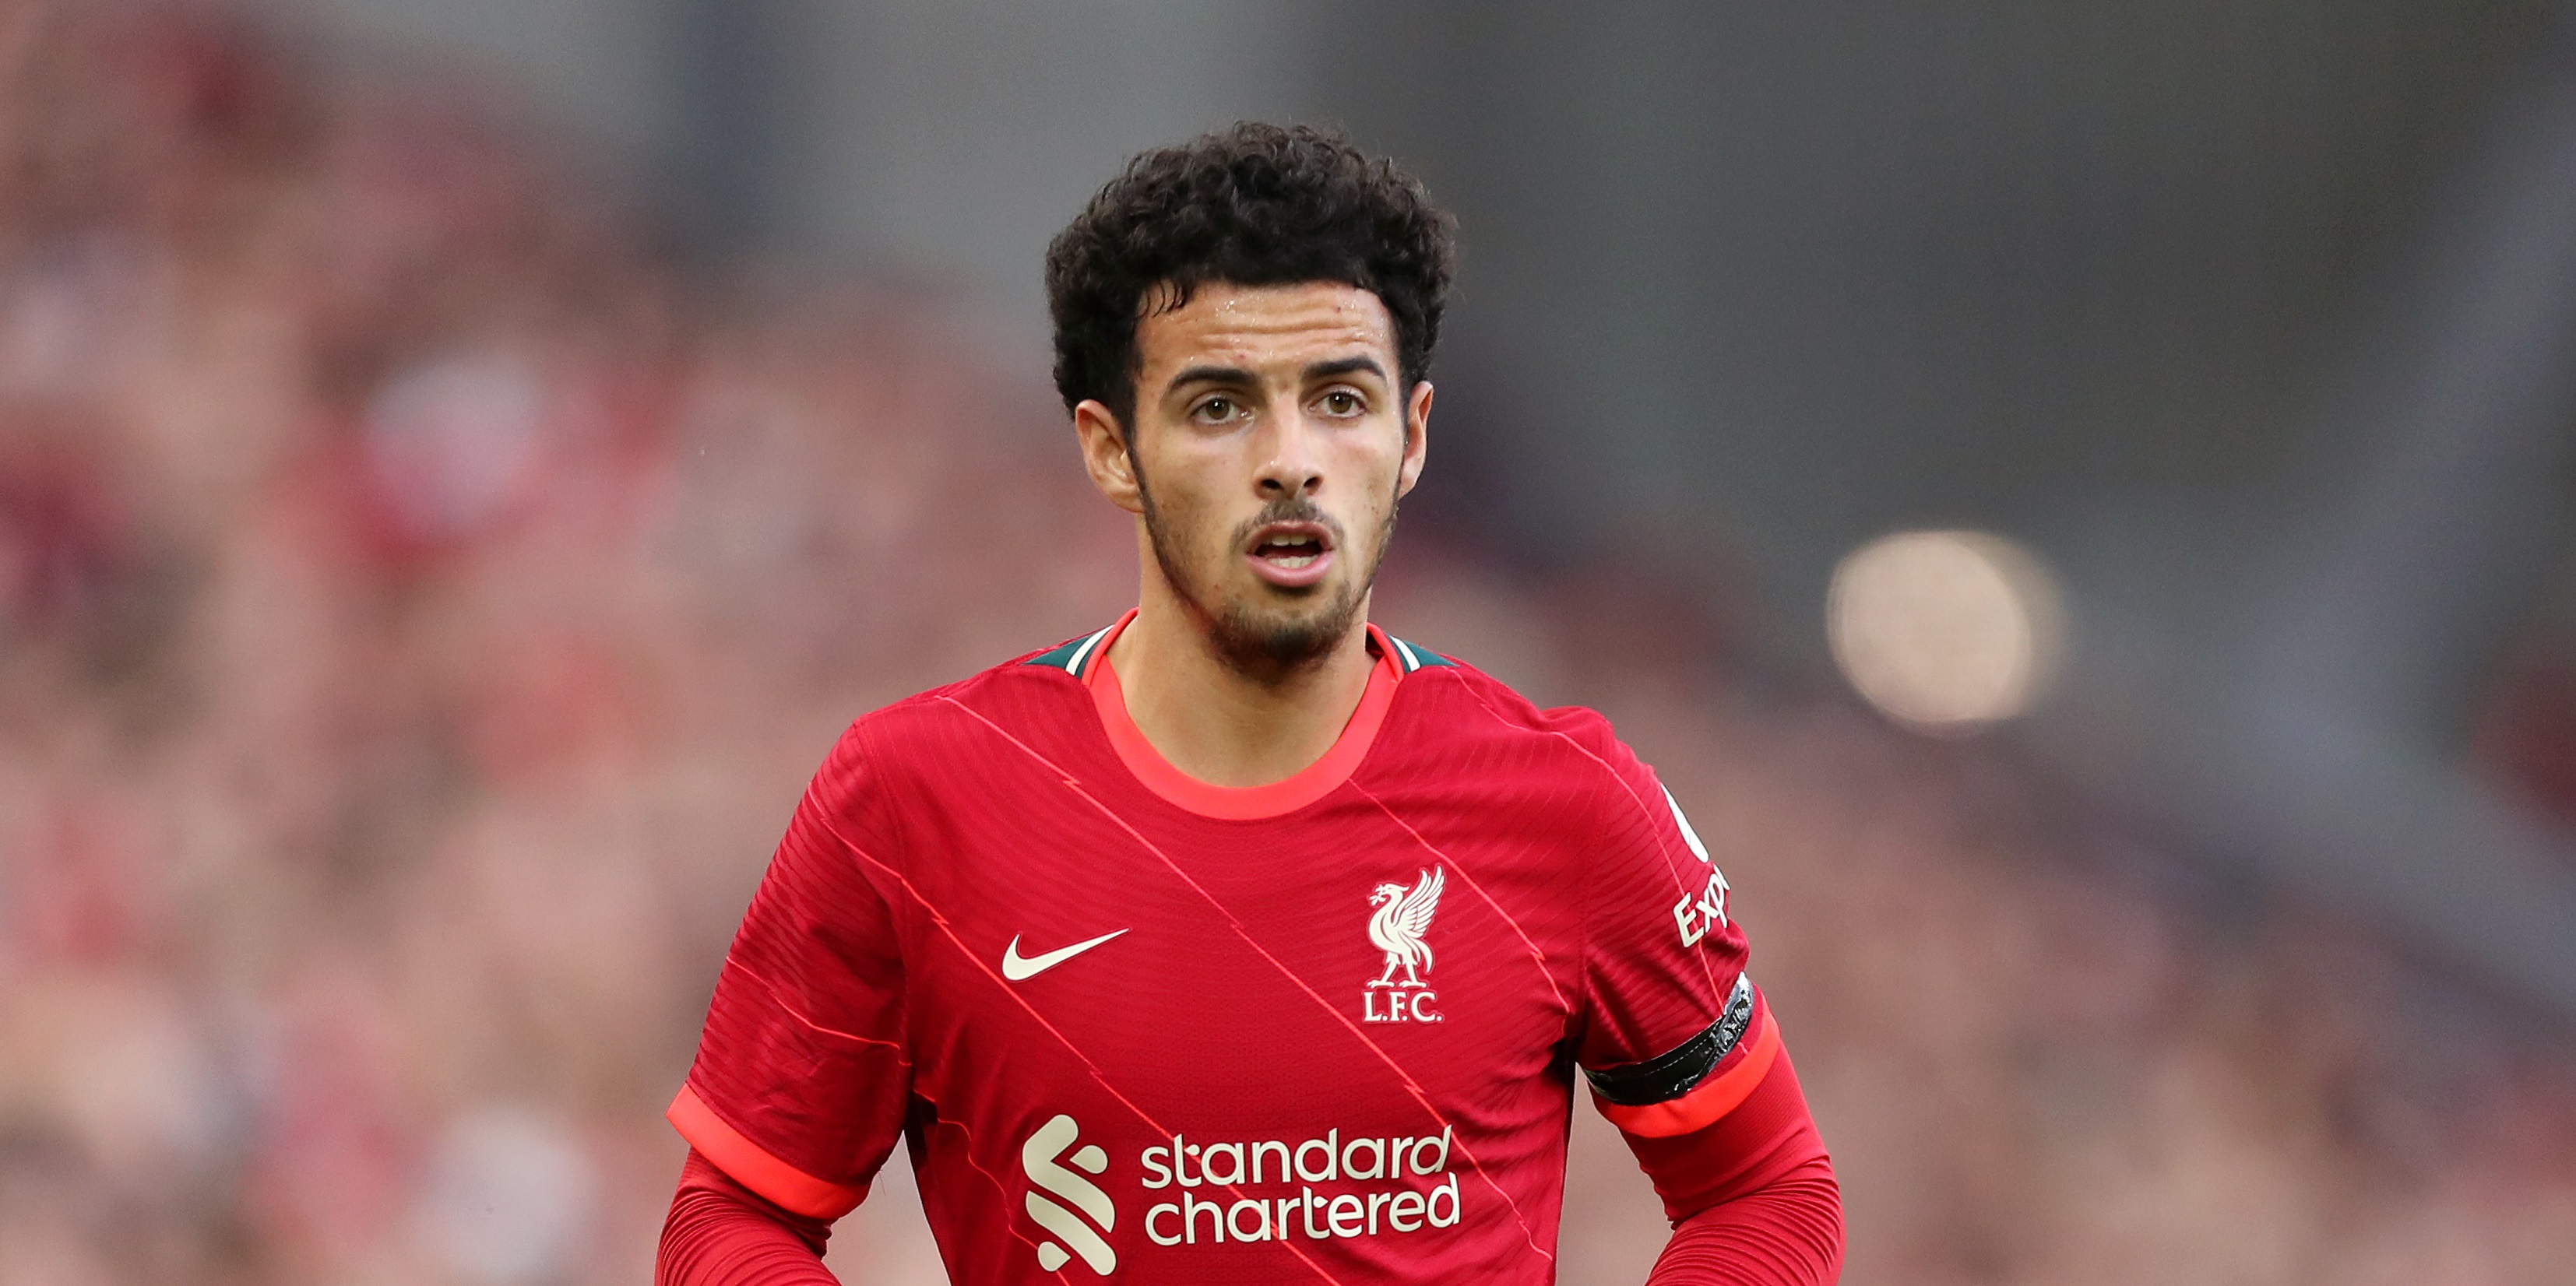 Liverpool handed fresh injury concern as midfielder suffers groin issue on international duty – ‘We’ll monitor the situation’